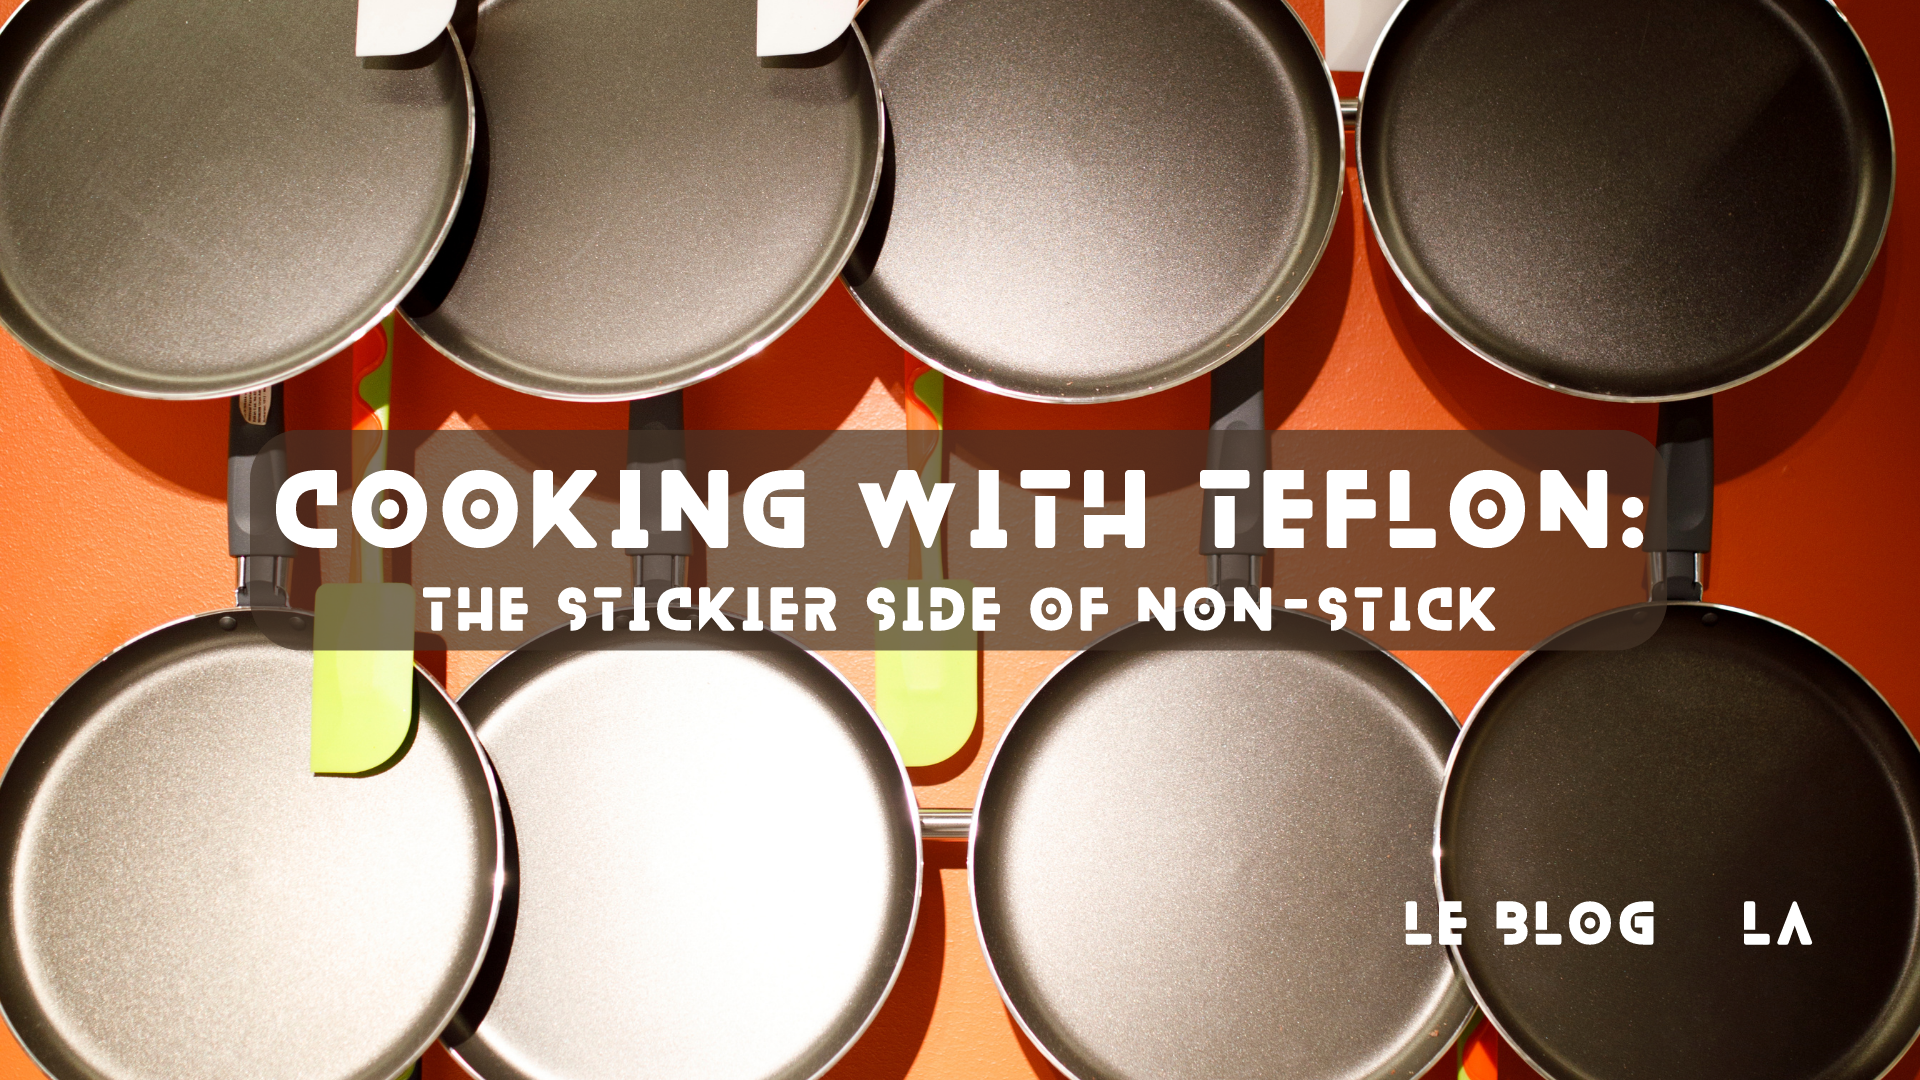 Cooking with Teflon: The Stickier Side of Non-Stick